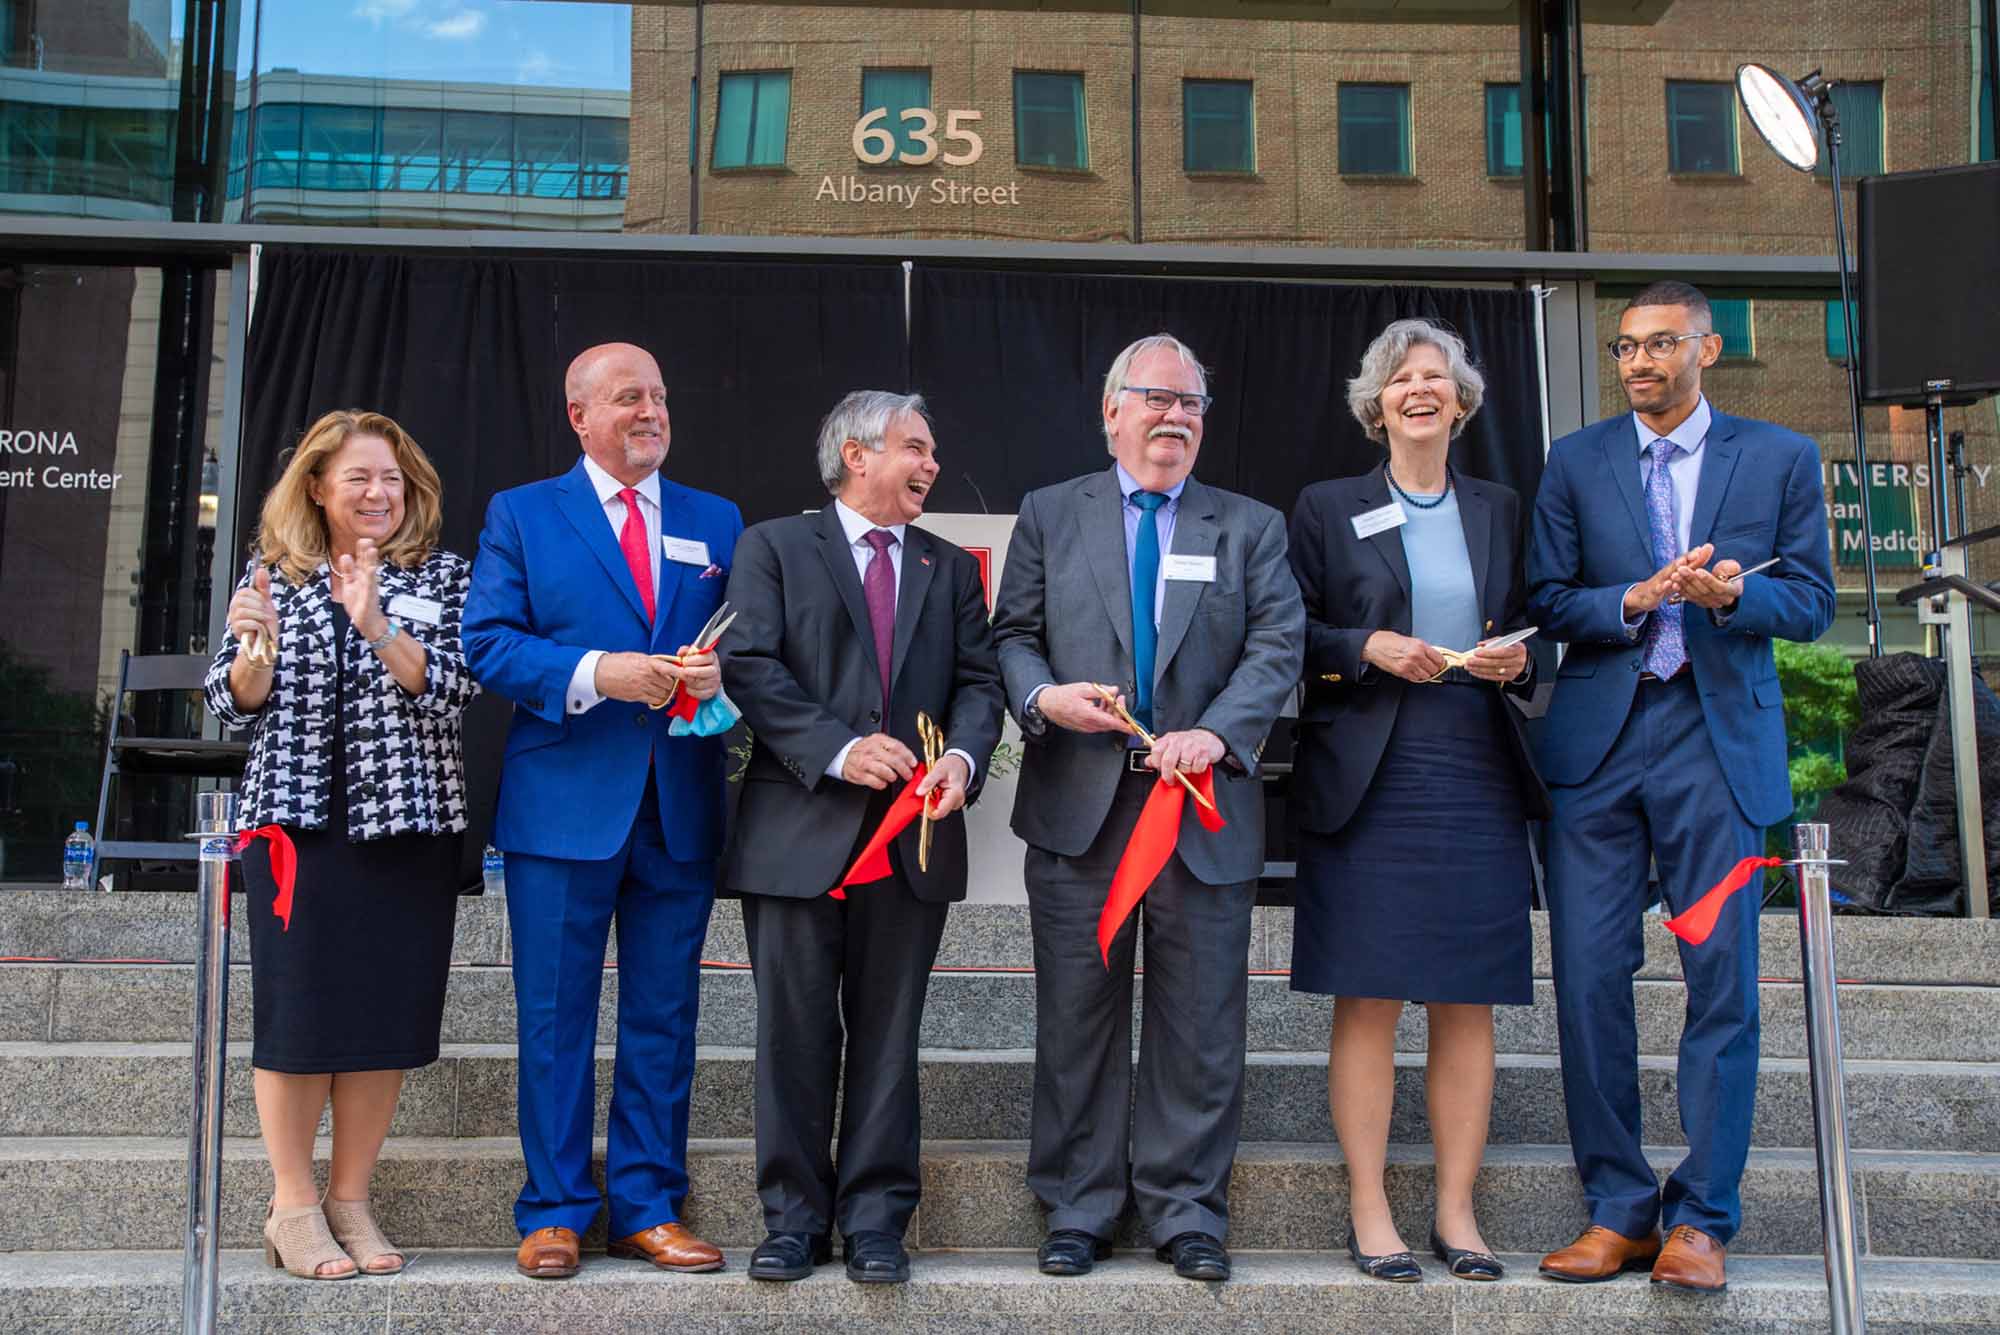 Dr. Terri Dolan, David Lustbader, Cataldo Leone, Robert A. Brown, Karen Antman, and Justin Middleton at the ribbon cutting celebrating the completion of the three-year, $115 million expansion and renovation of the Goldman School of Dental Medicine, Tuesday, September 21.